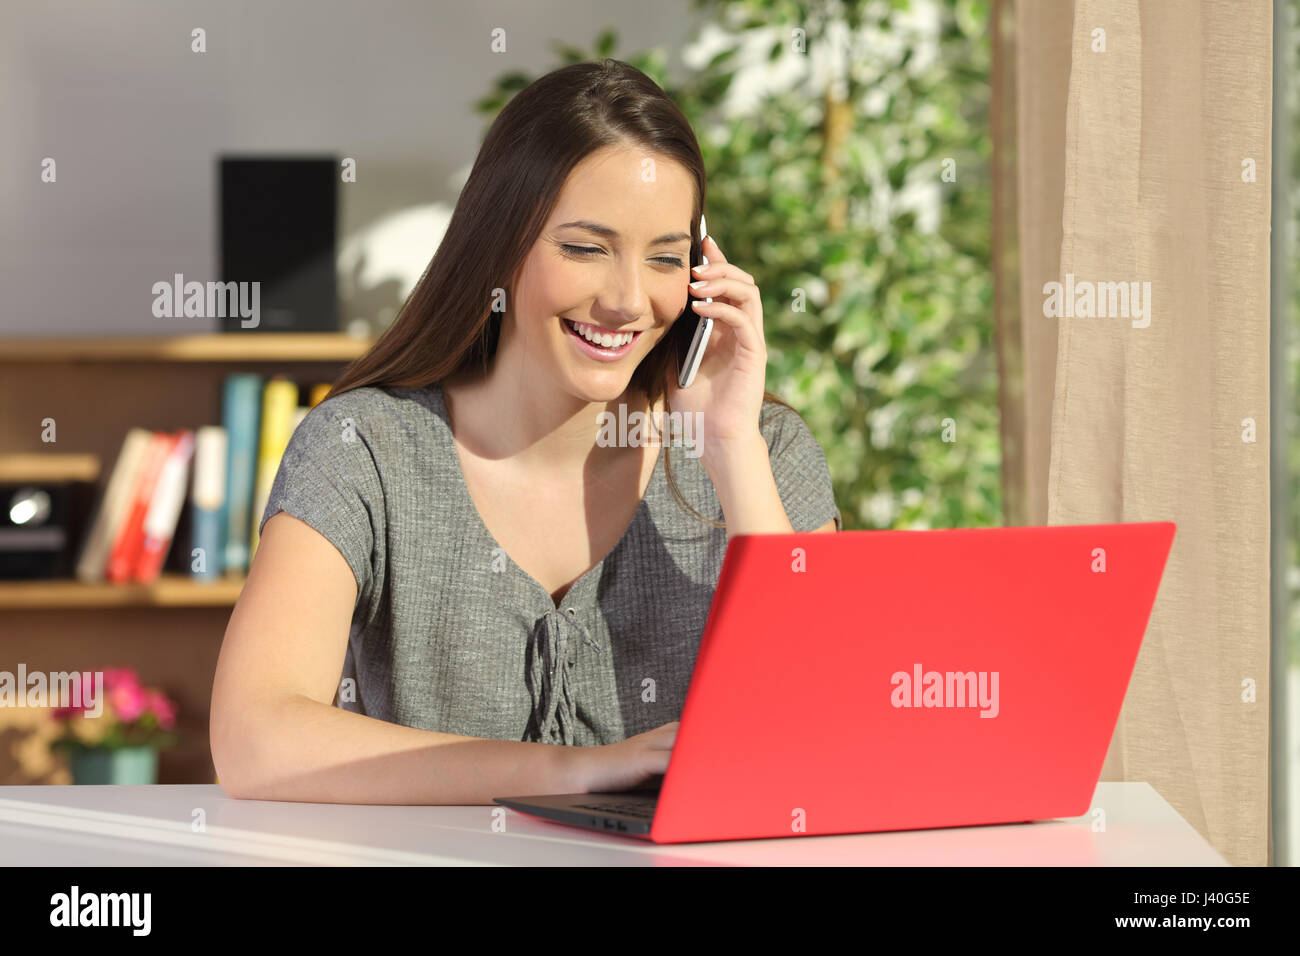 Attractive housewife using a red laptop and calling to the assistance service on line with a mobile phone in a table in a house interior Stock Photo